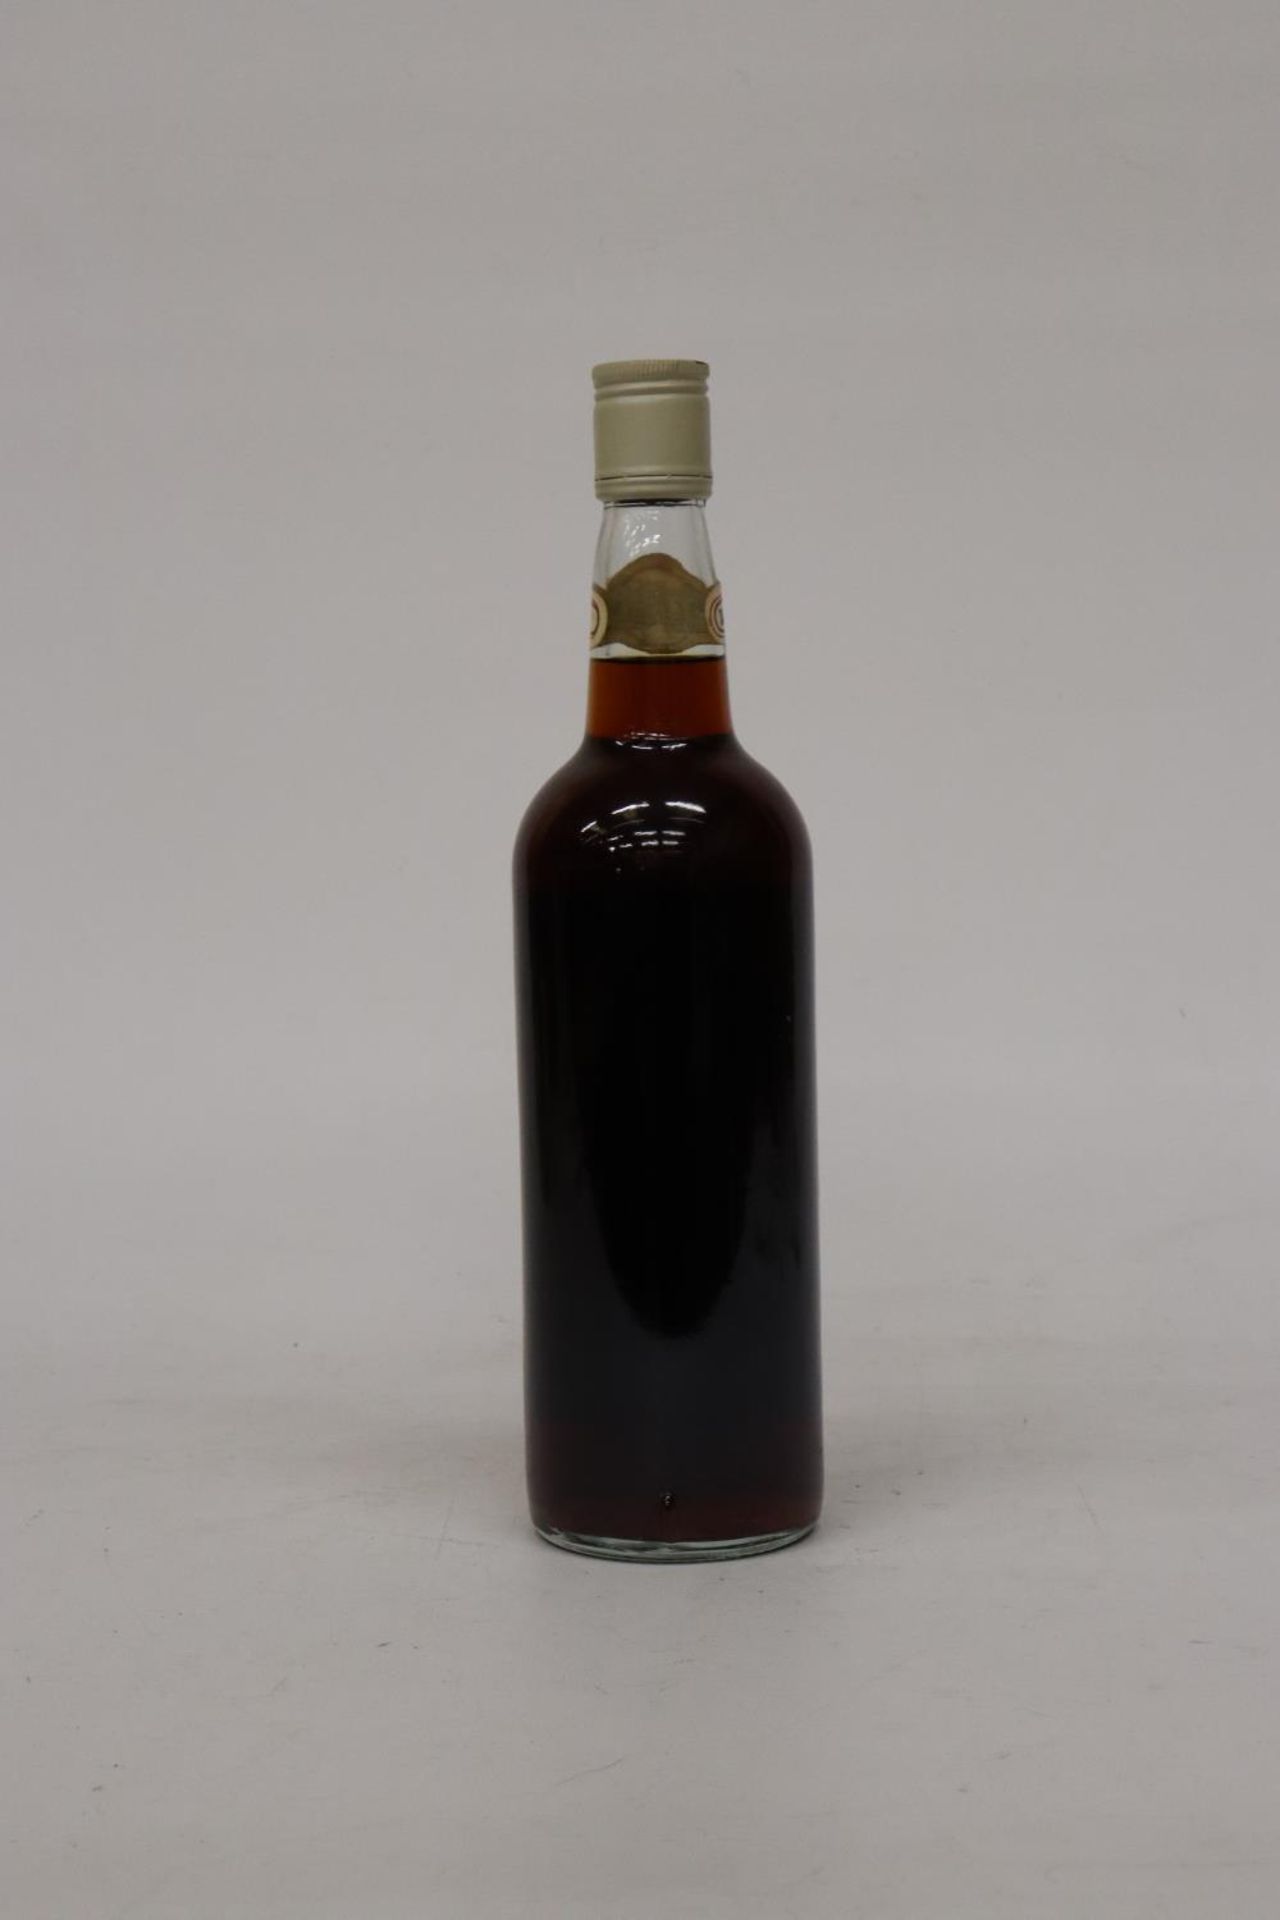 A 75.7 CL BOTTLE OF LAMBS FINEST NAVY RUM - Image 2 of 2